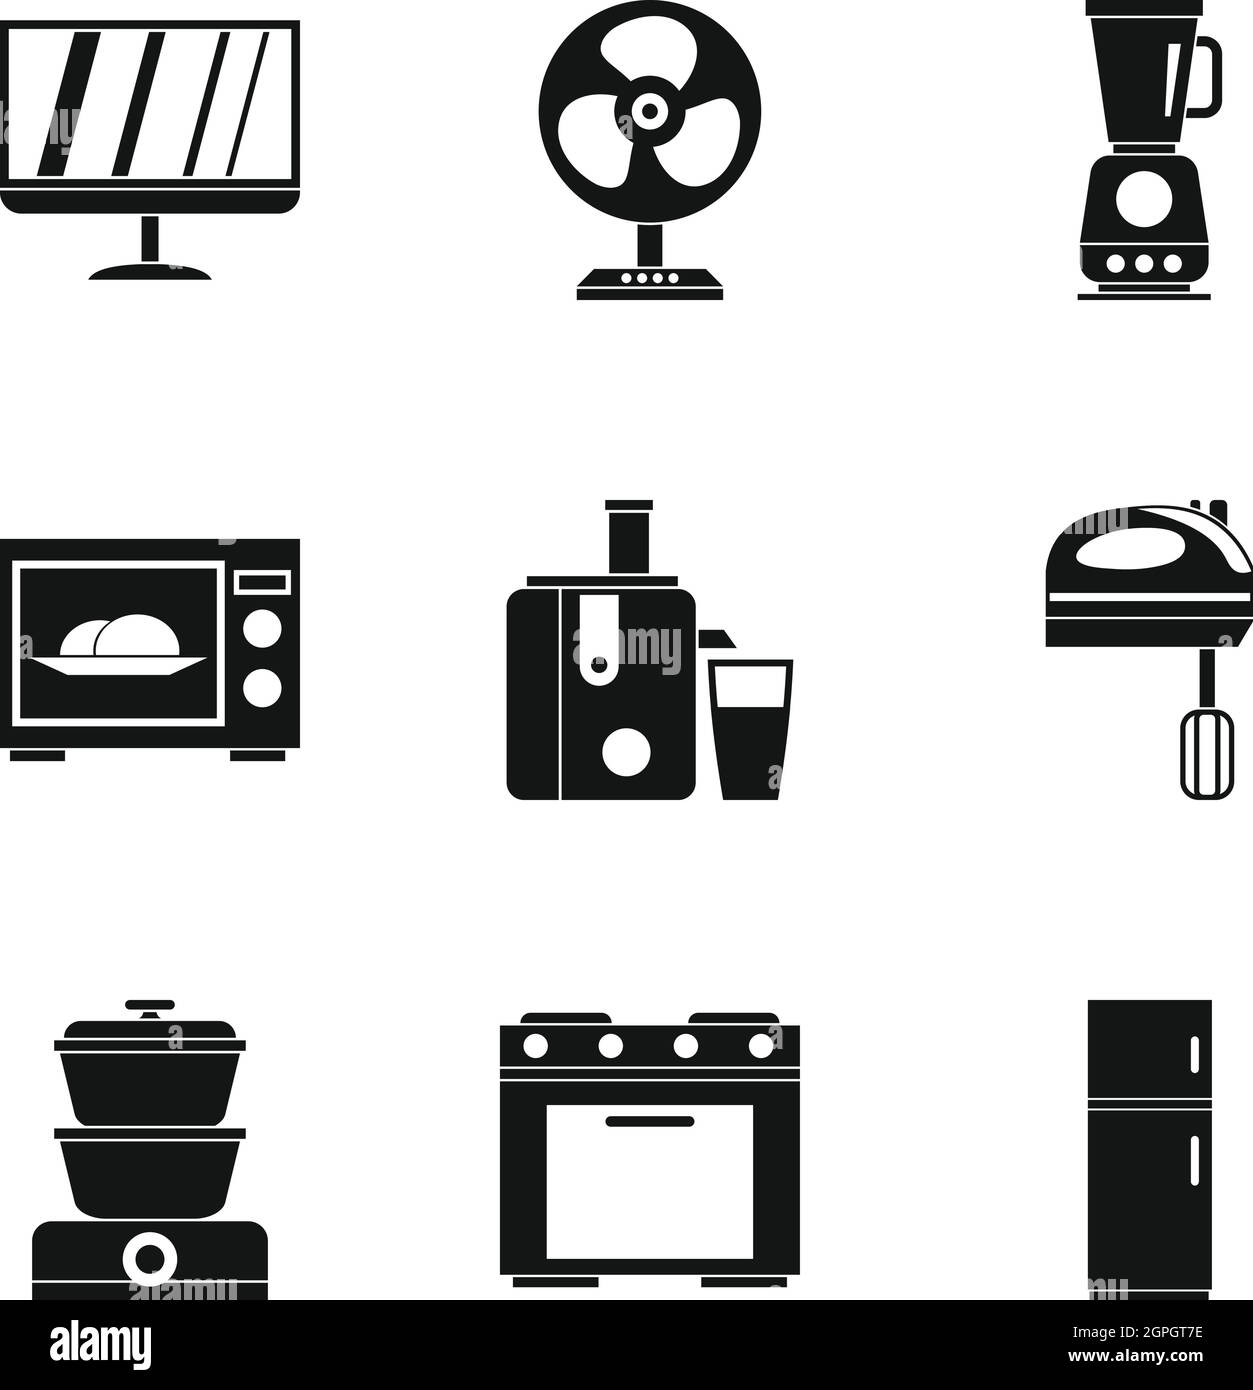 Technique icons set, simple style Stock Vector